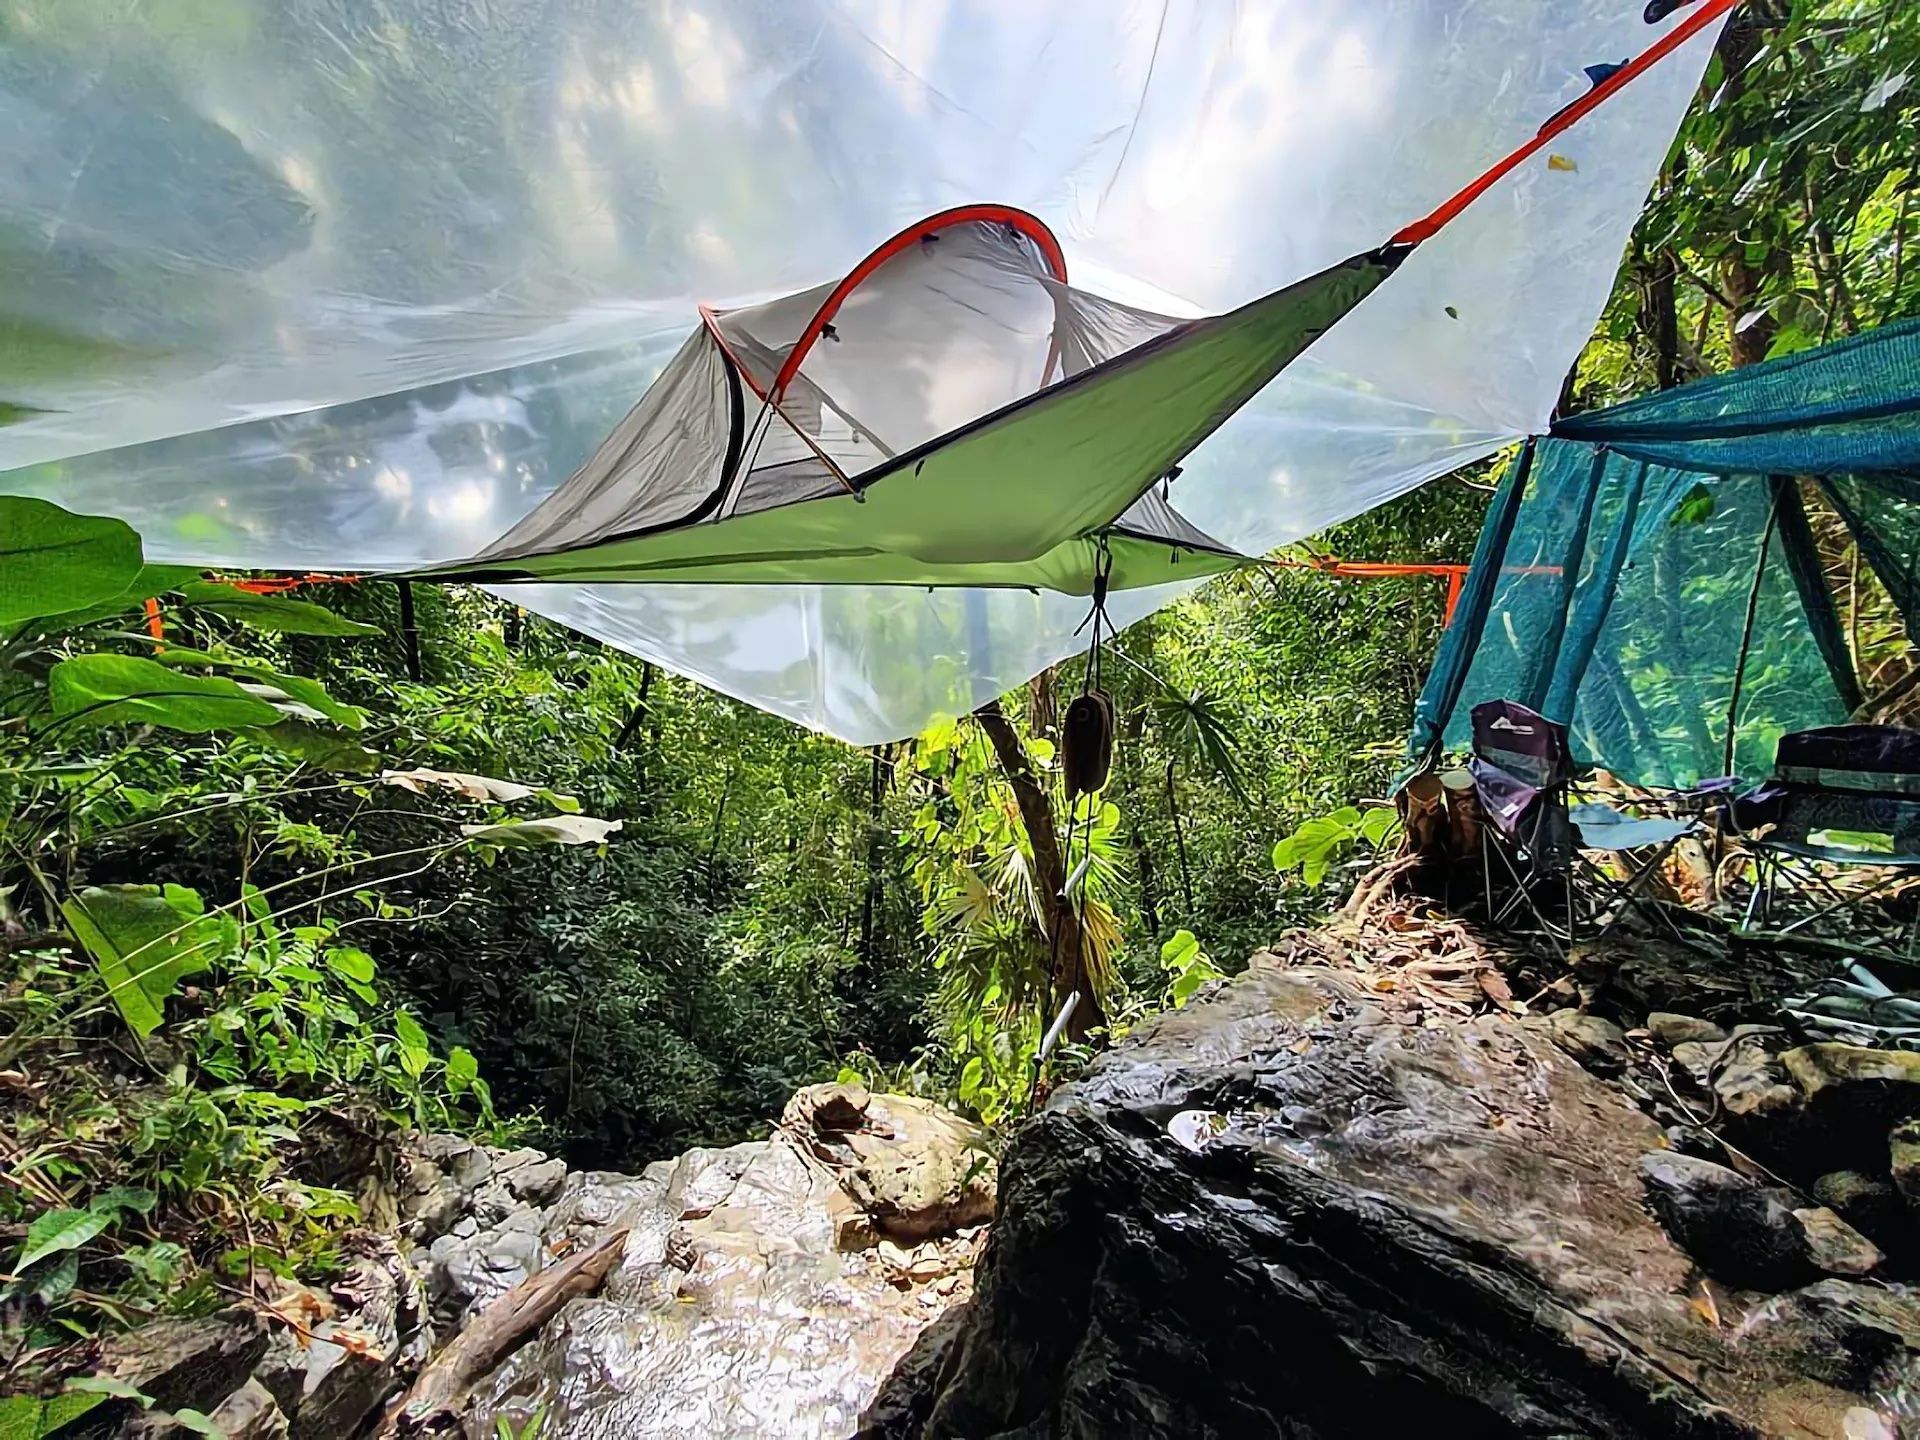 A tree camping tent in the Costa Rican rainforest.